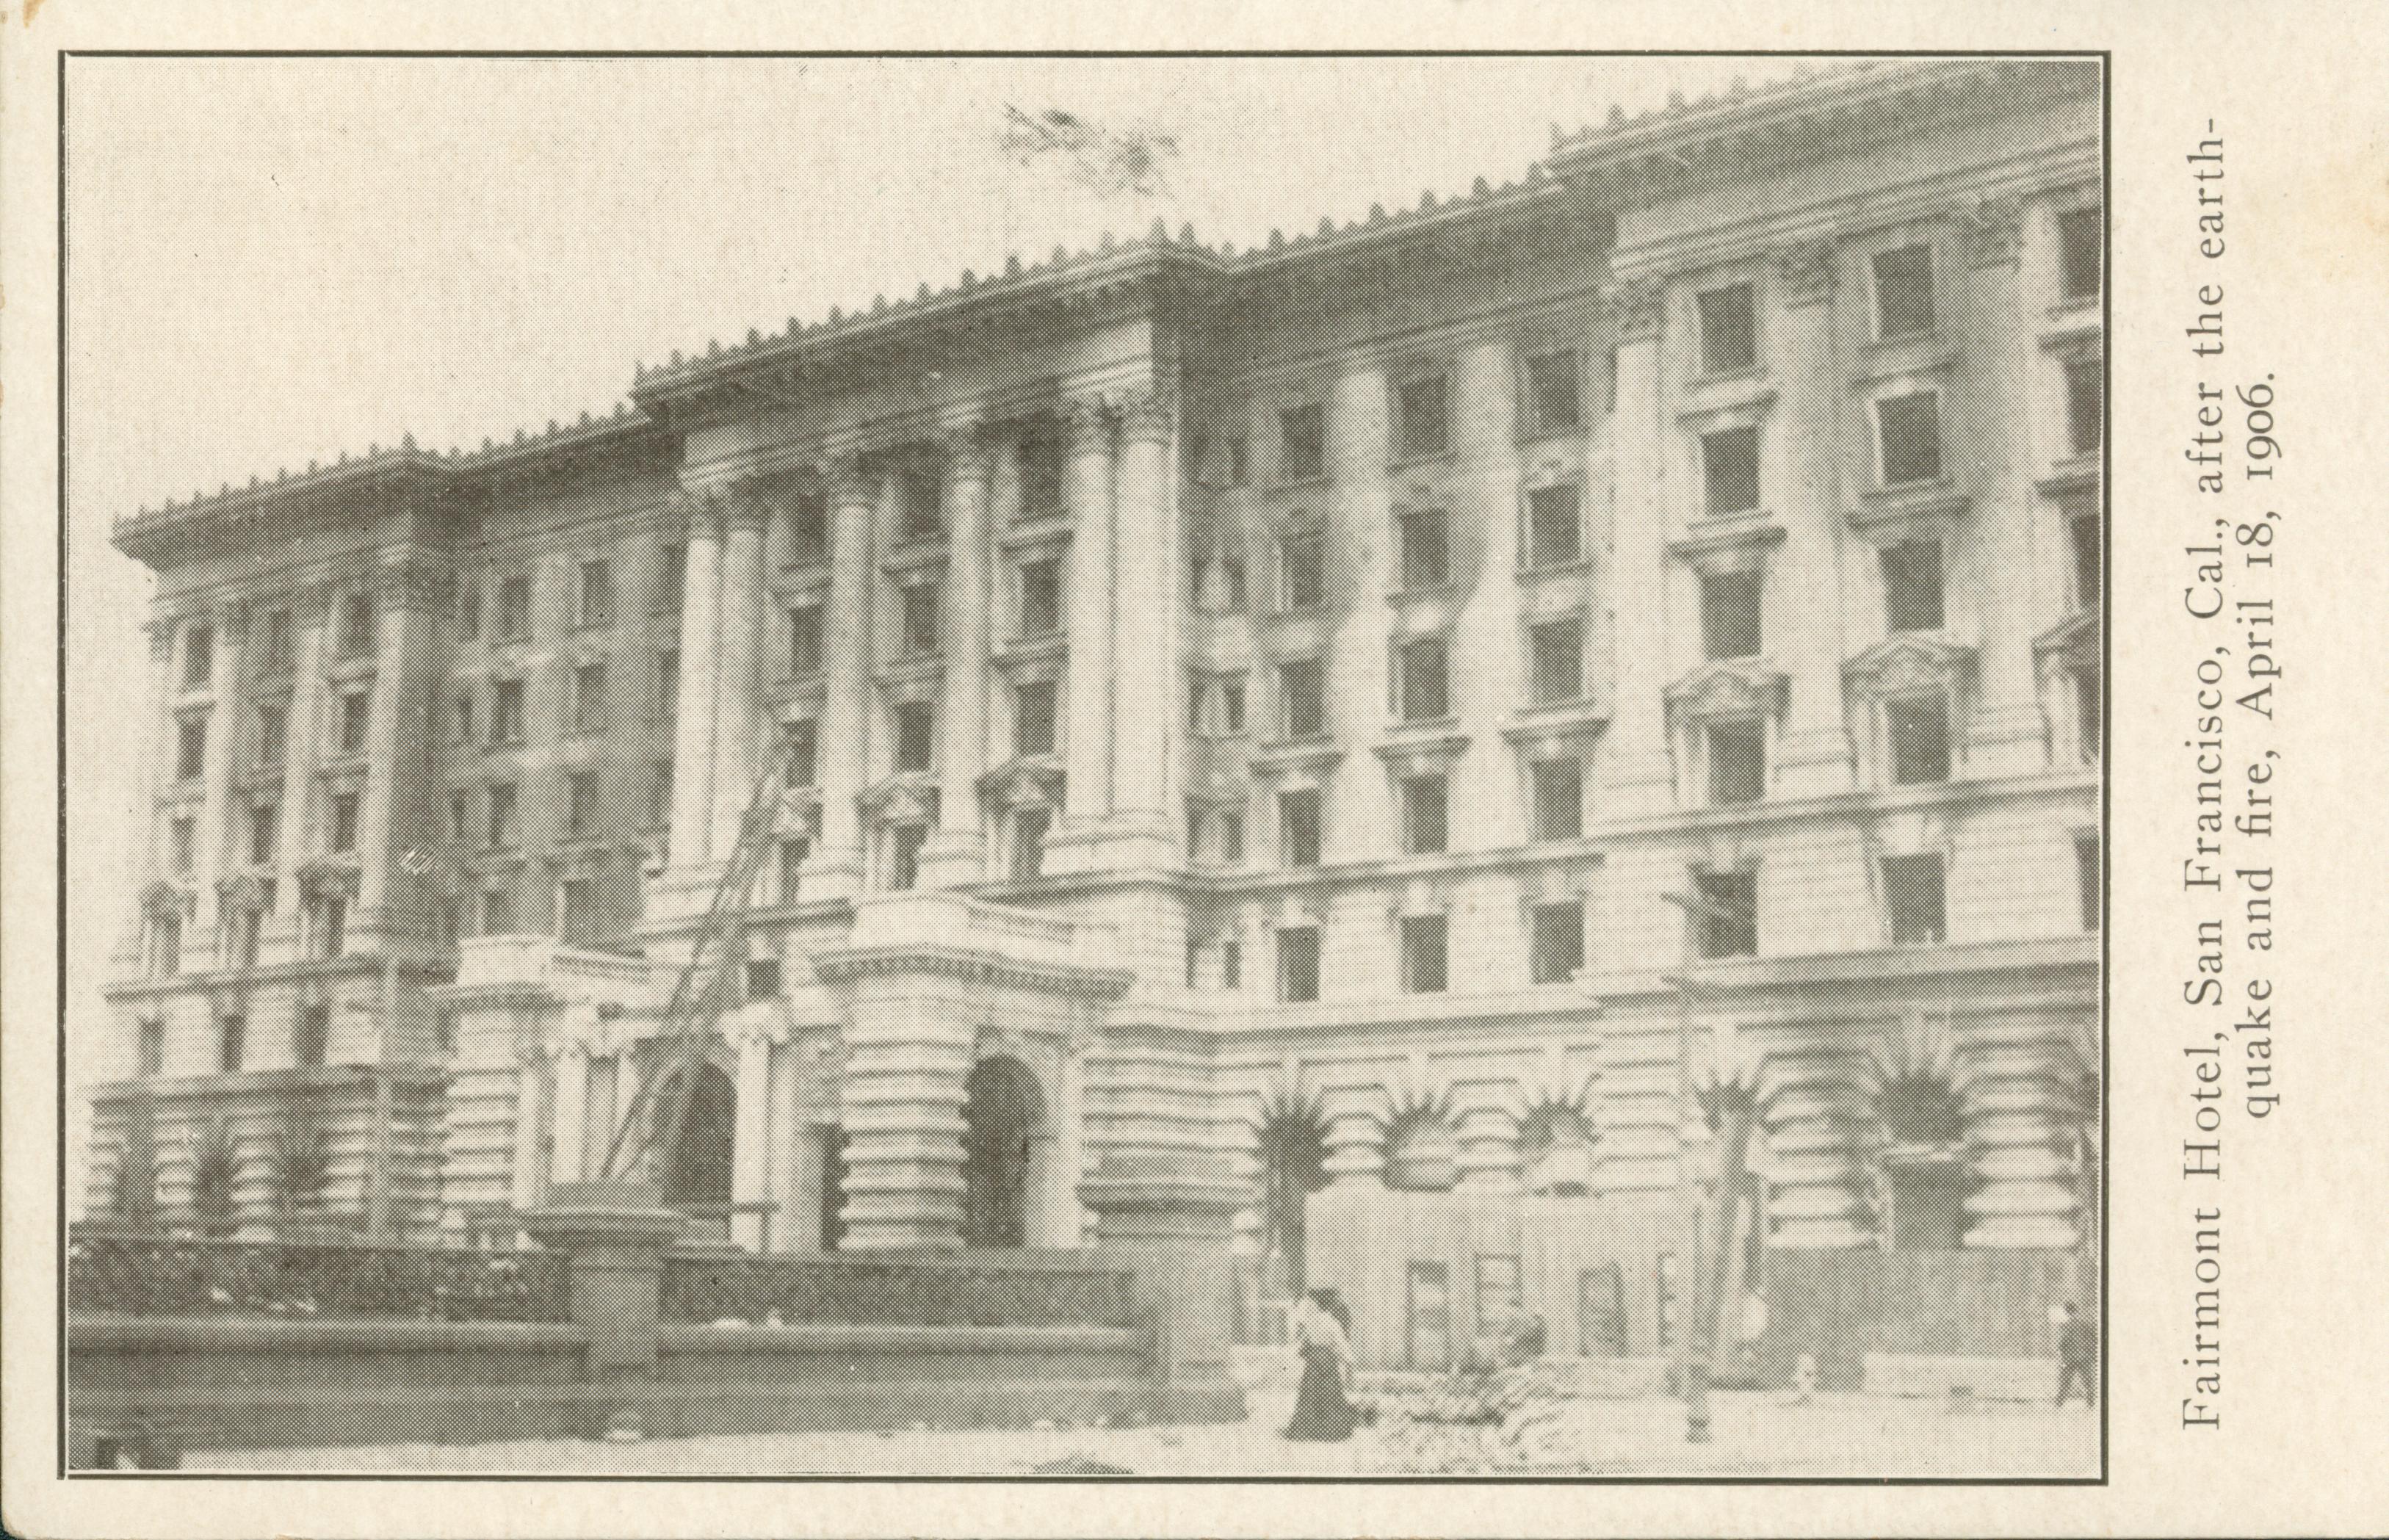 Shows the front of the Fairmont Hotel after the earthquake